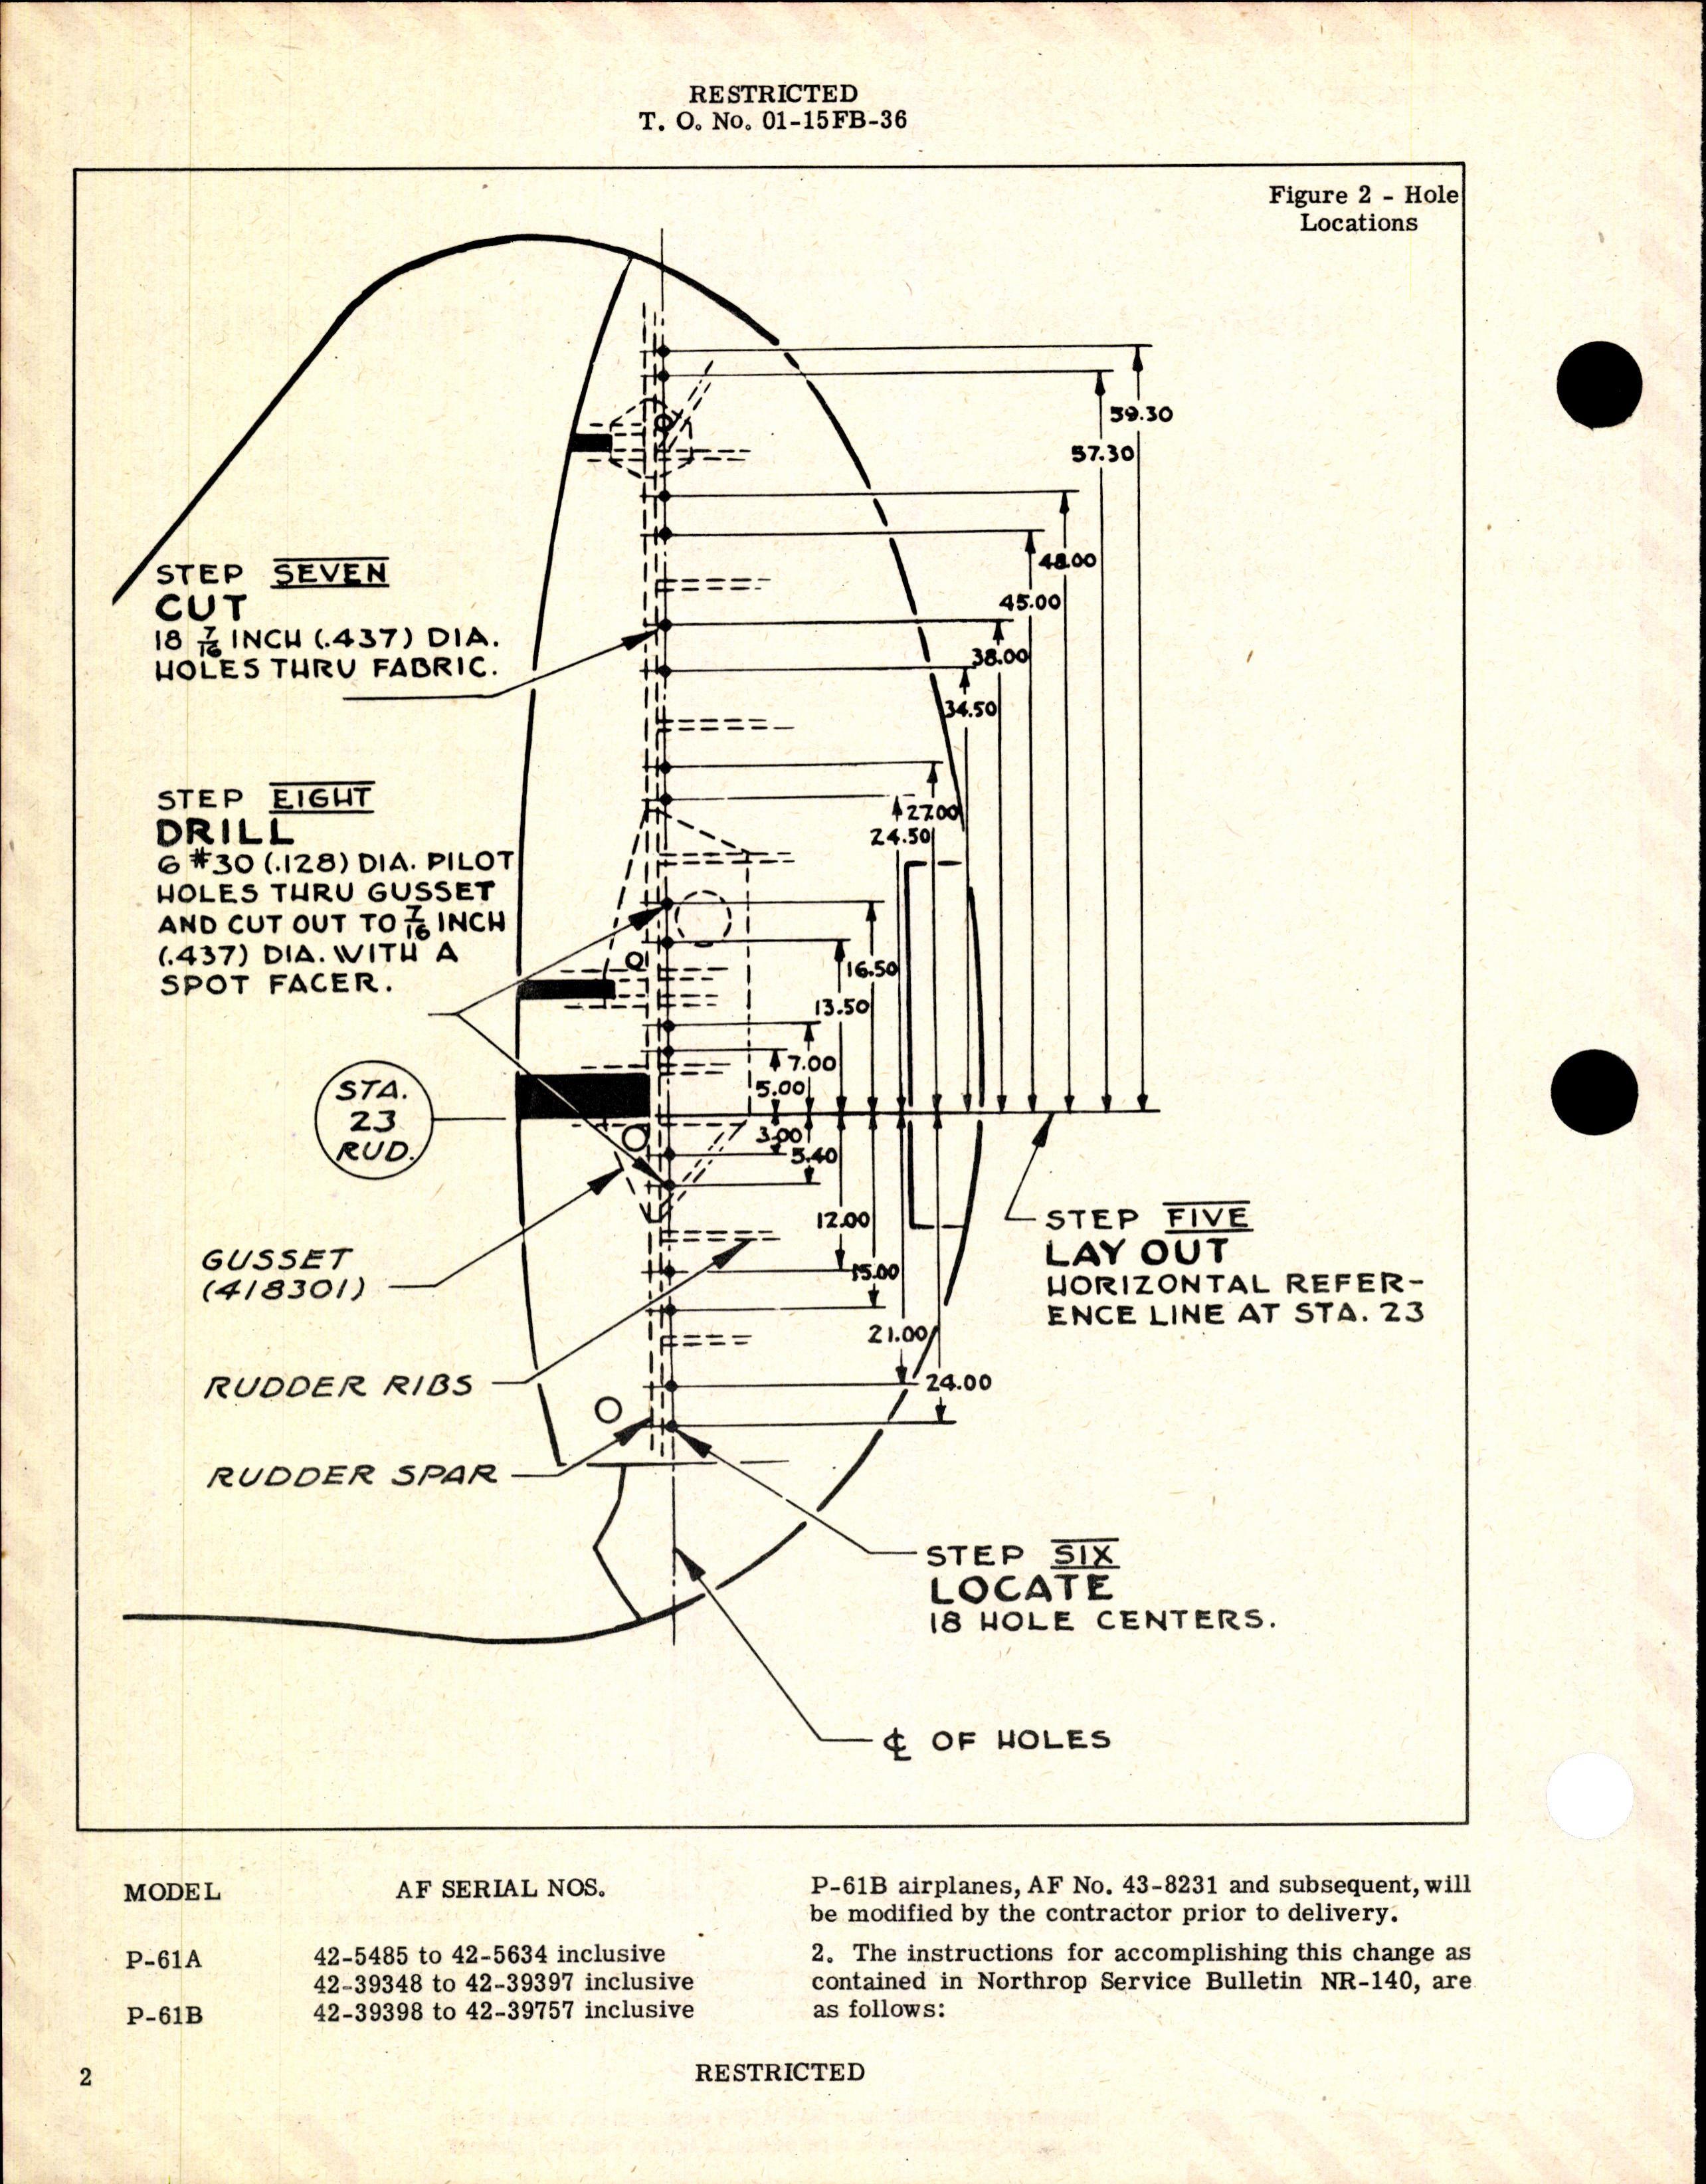 Sample page 2 from AirCorps Library document: Incorporation of Vent Holes in Rudder Fabric for P-61A and P-61B